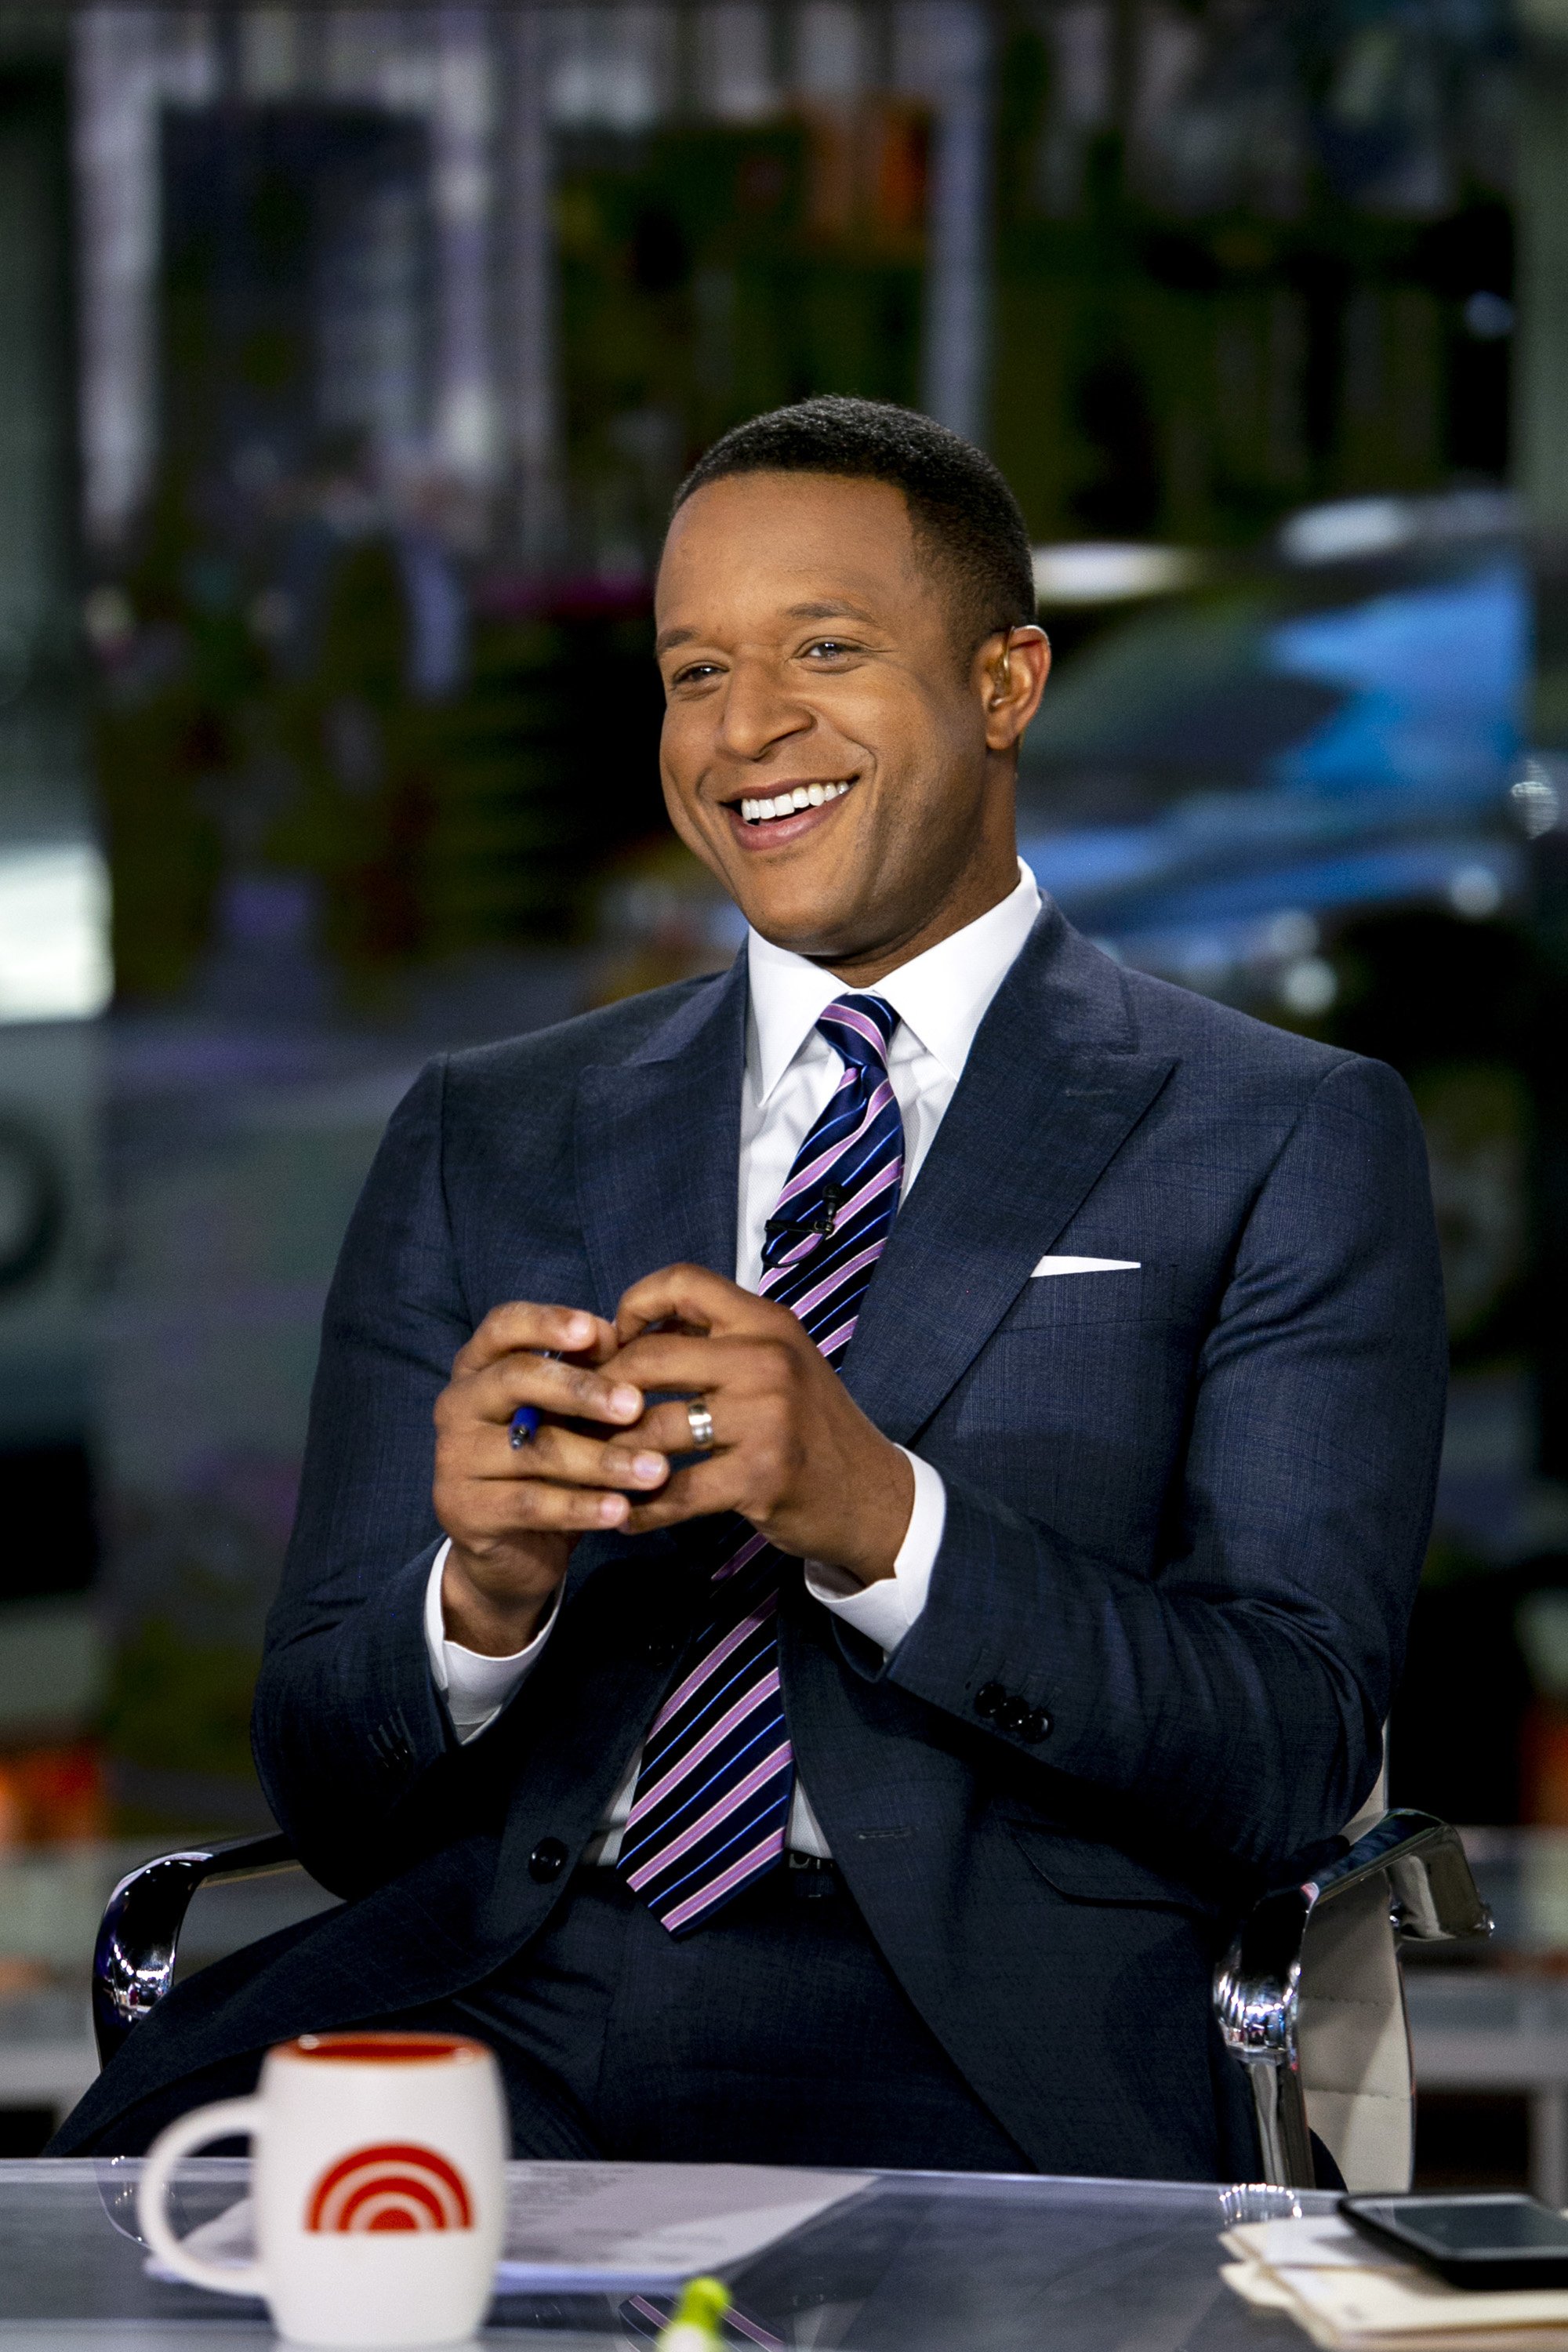 Craig Melvin picture on the "Today" show. 2019. | Photo: Getty Images